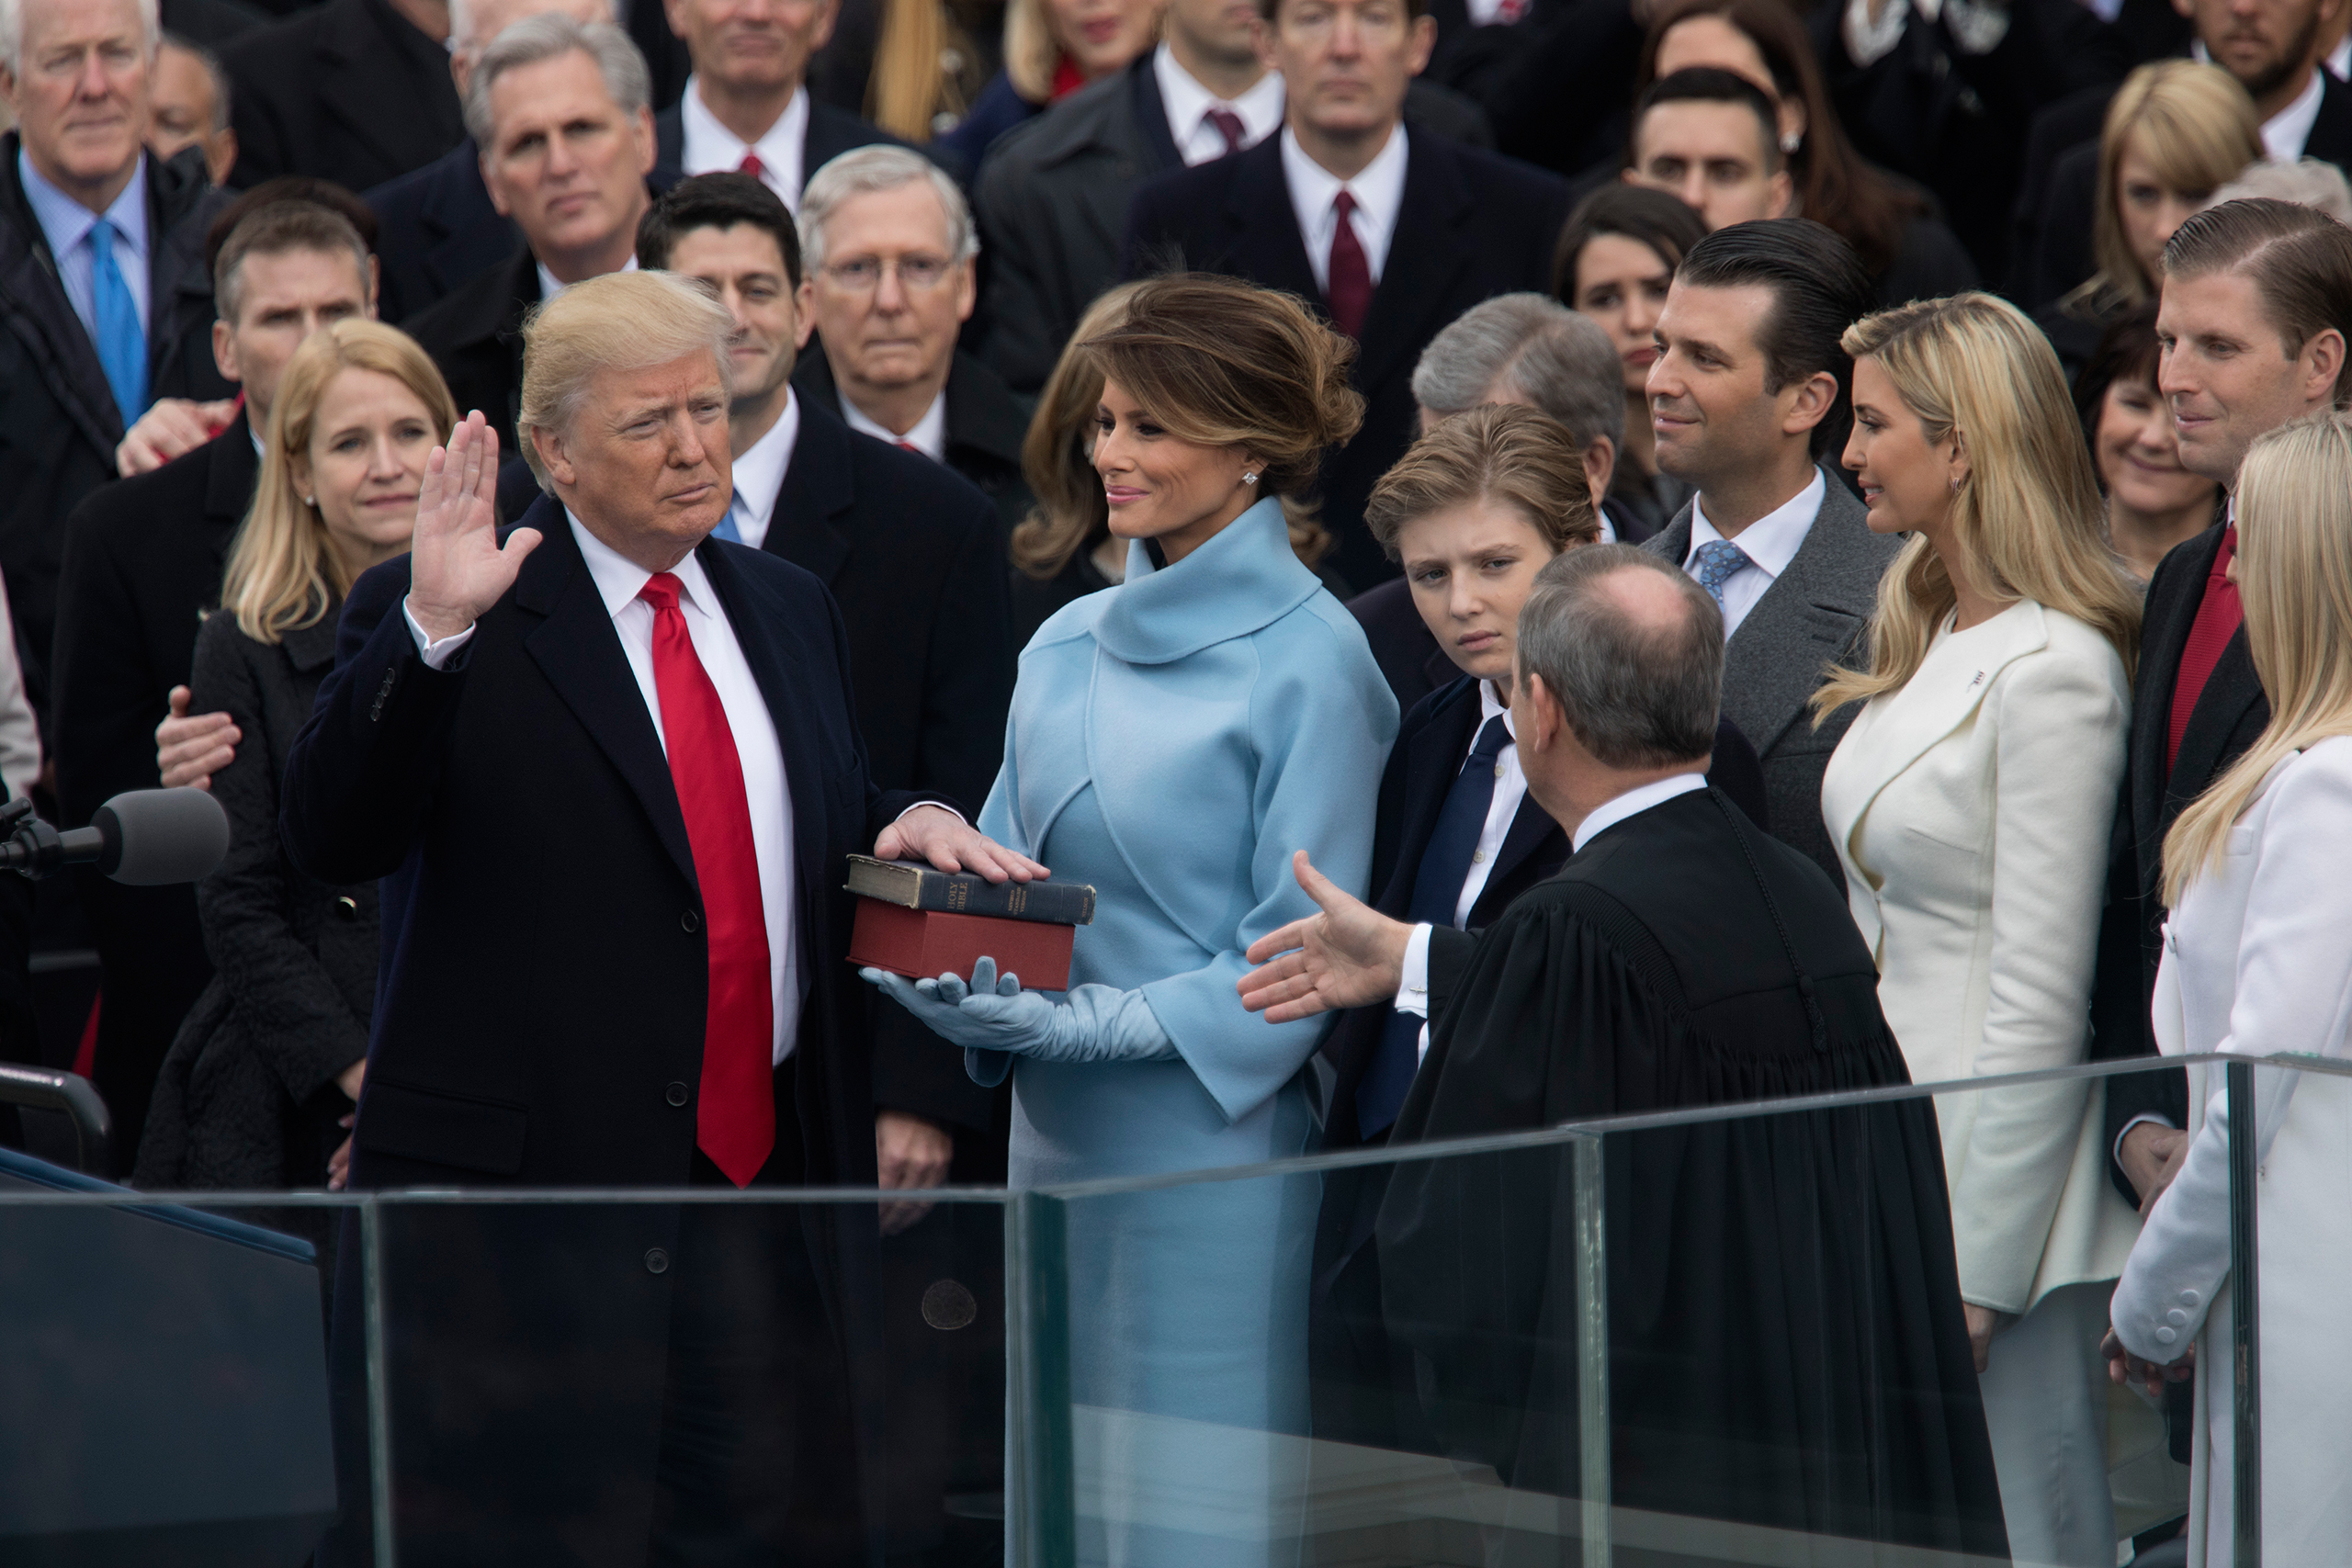 President Donald Trump takes the oath of office alongside his wife, Melania, at the Capitol in Washington on Jan. 20, 2017.